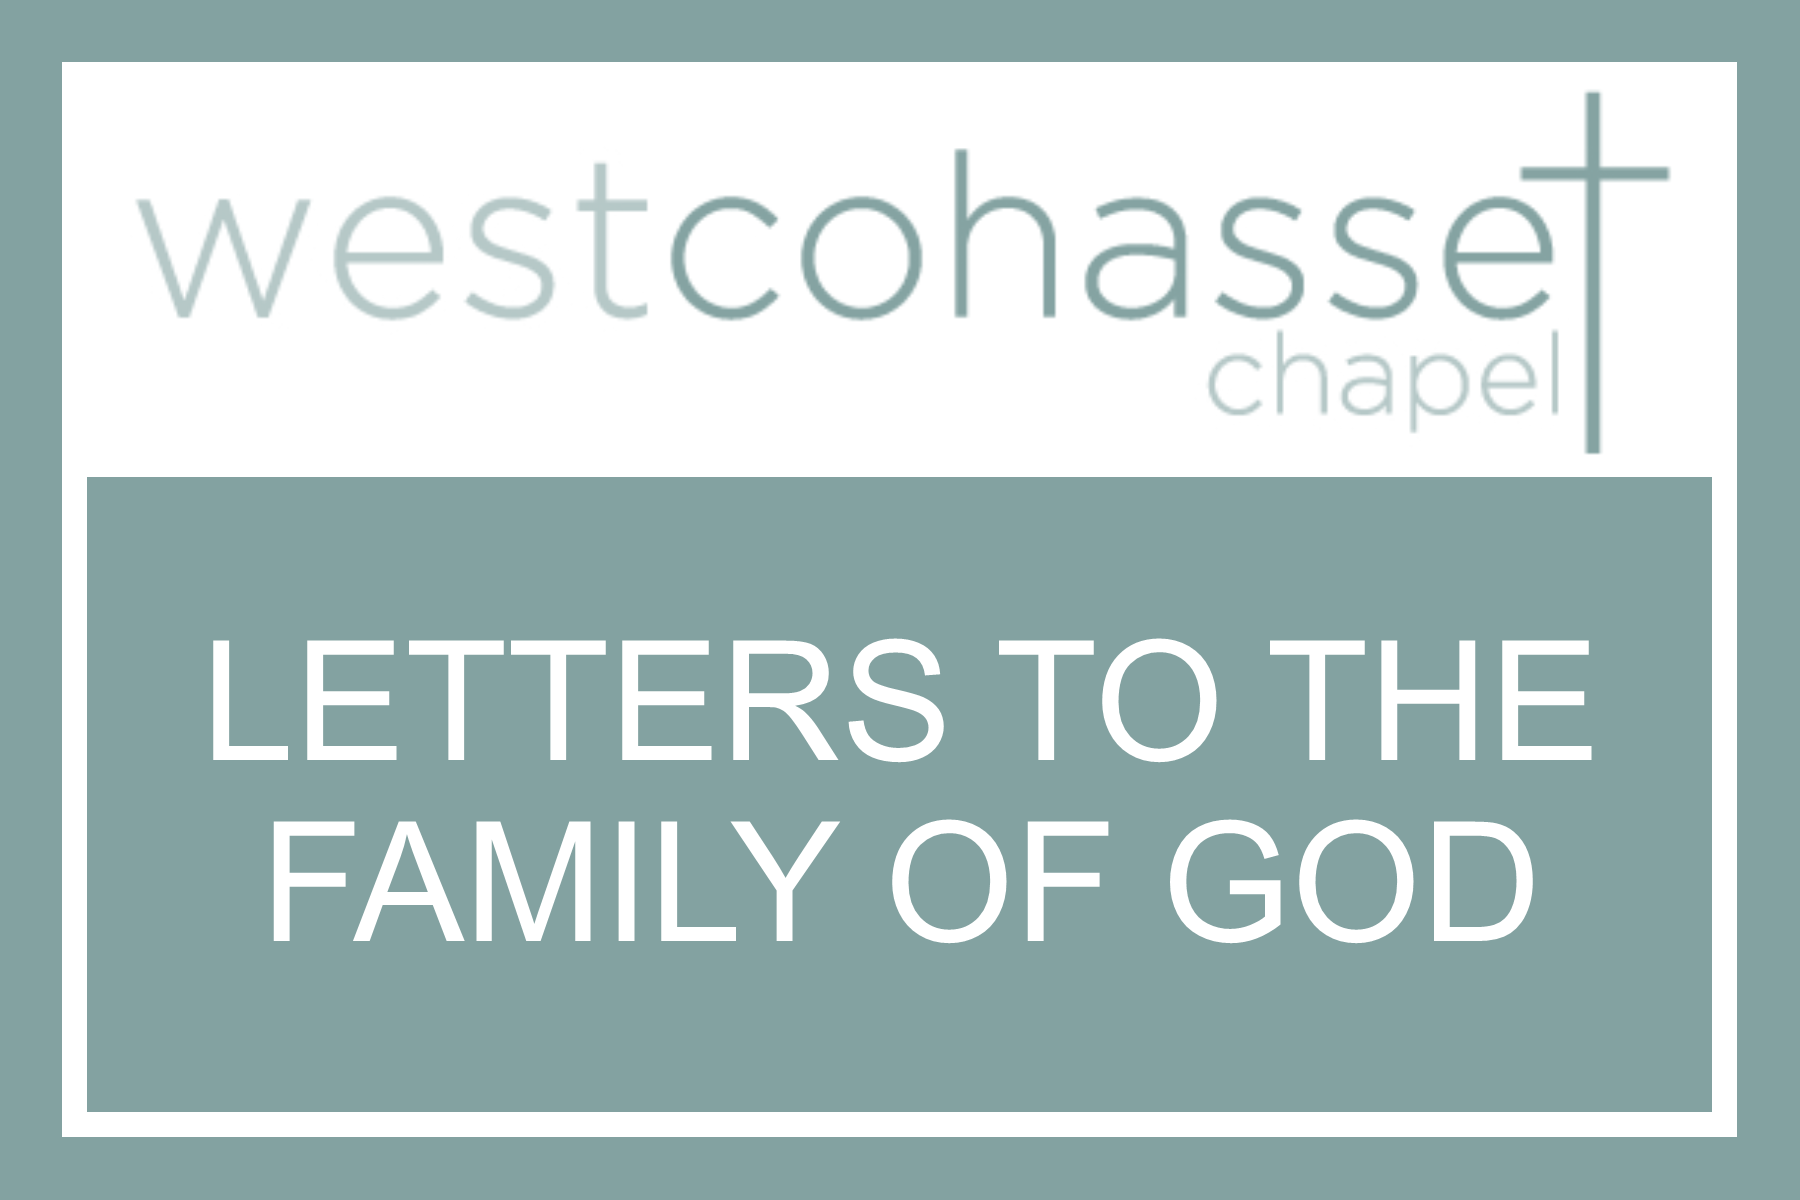 Letters-To-The-Family-of-God-WCC